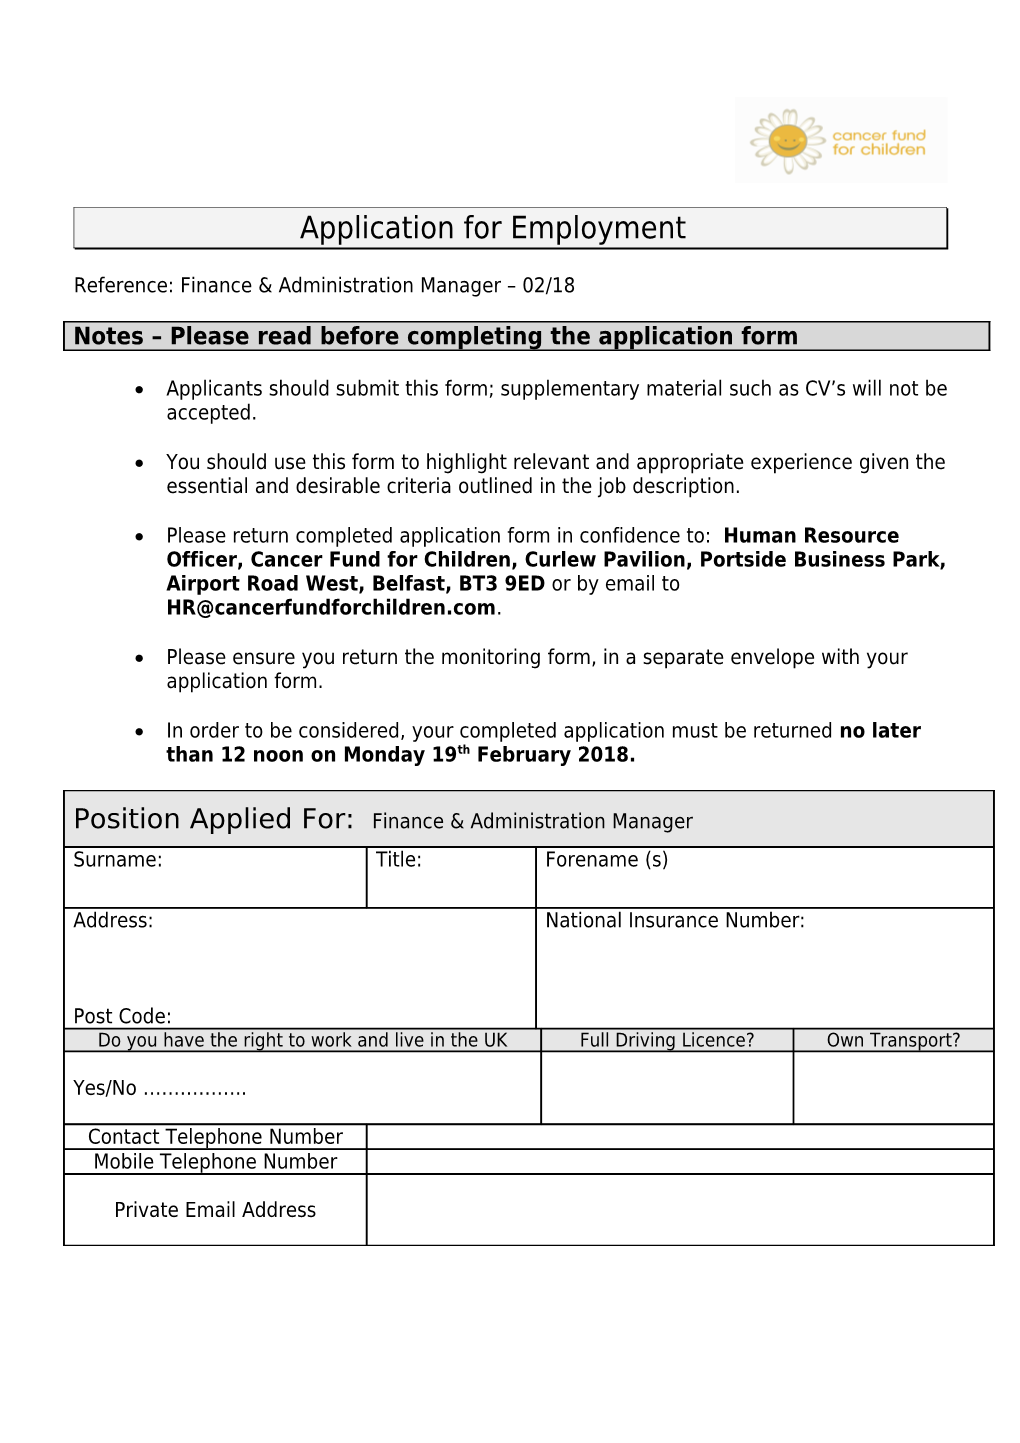 Application for Employment s113